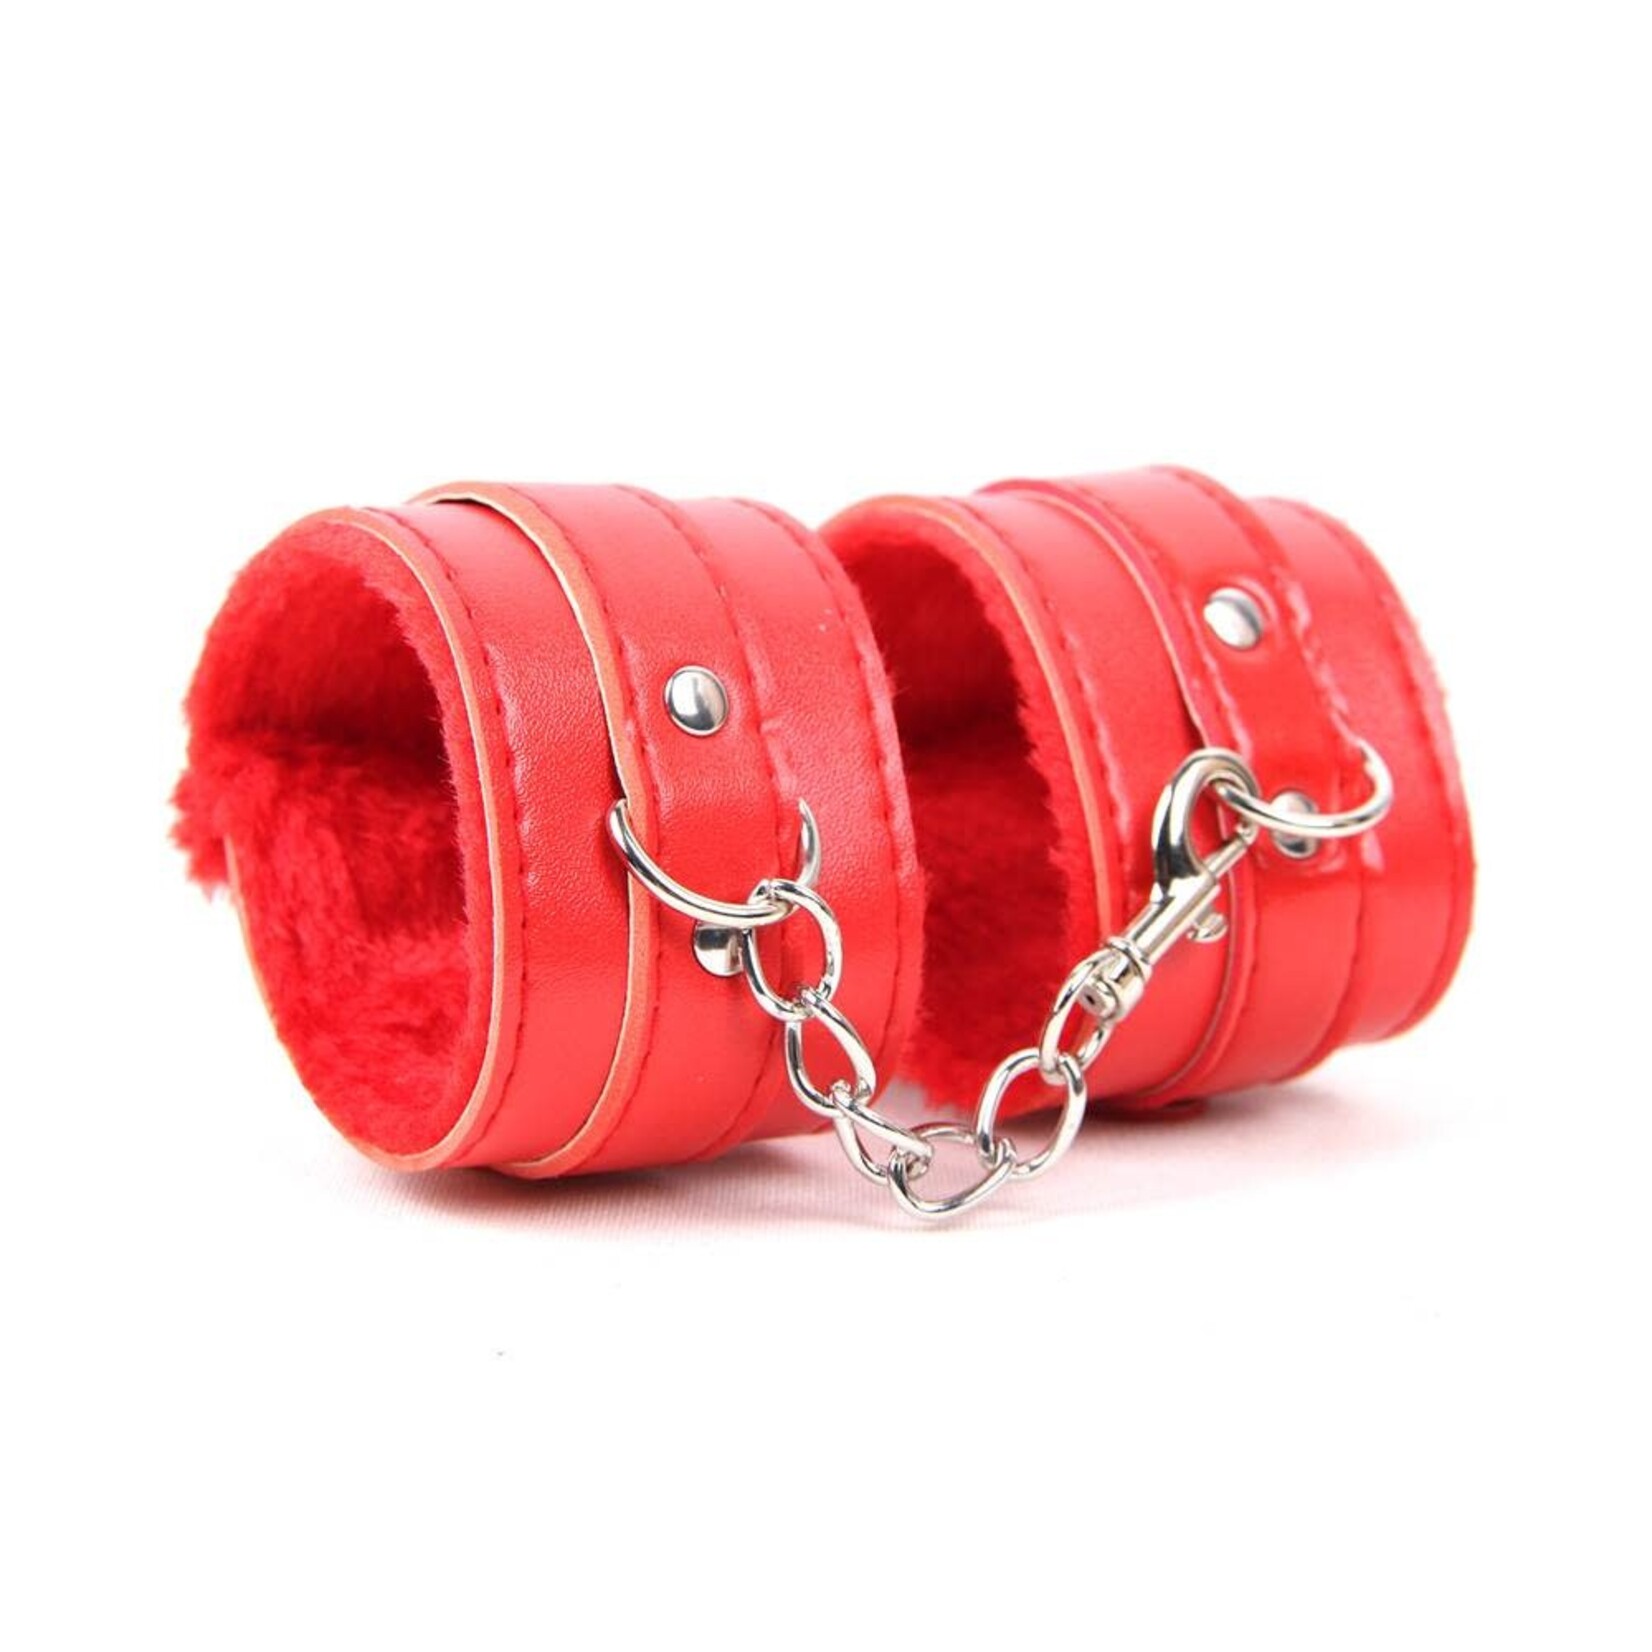 OH YEAH! -  RED SM BONDAGE SEX LEATHER HANDCUFFS ONE SIZE